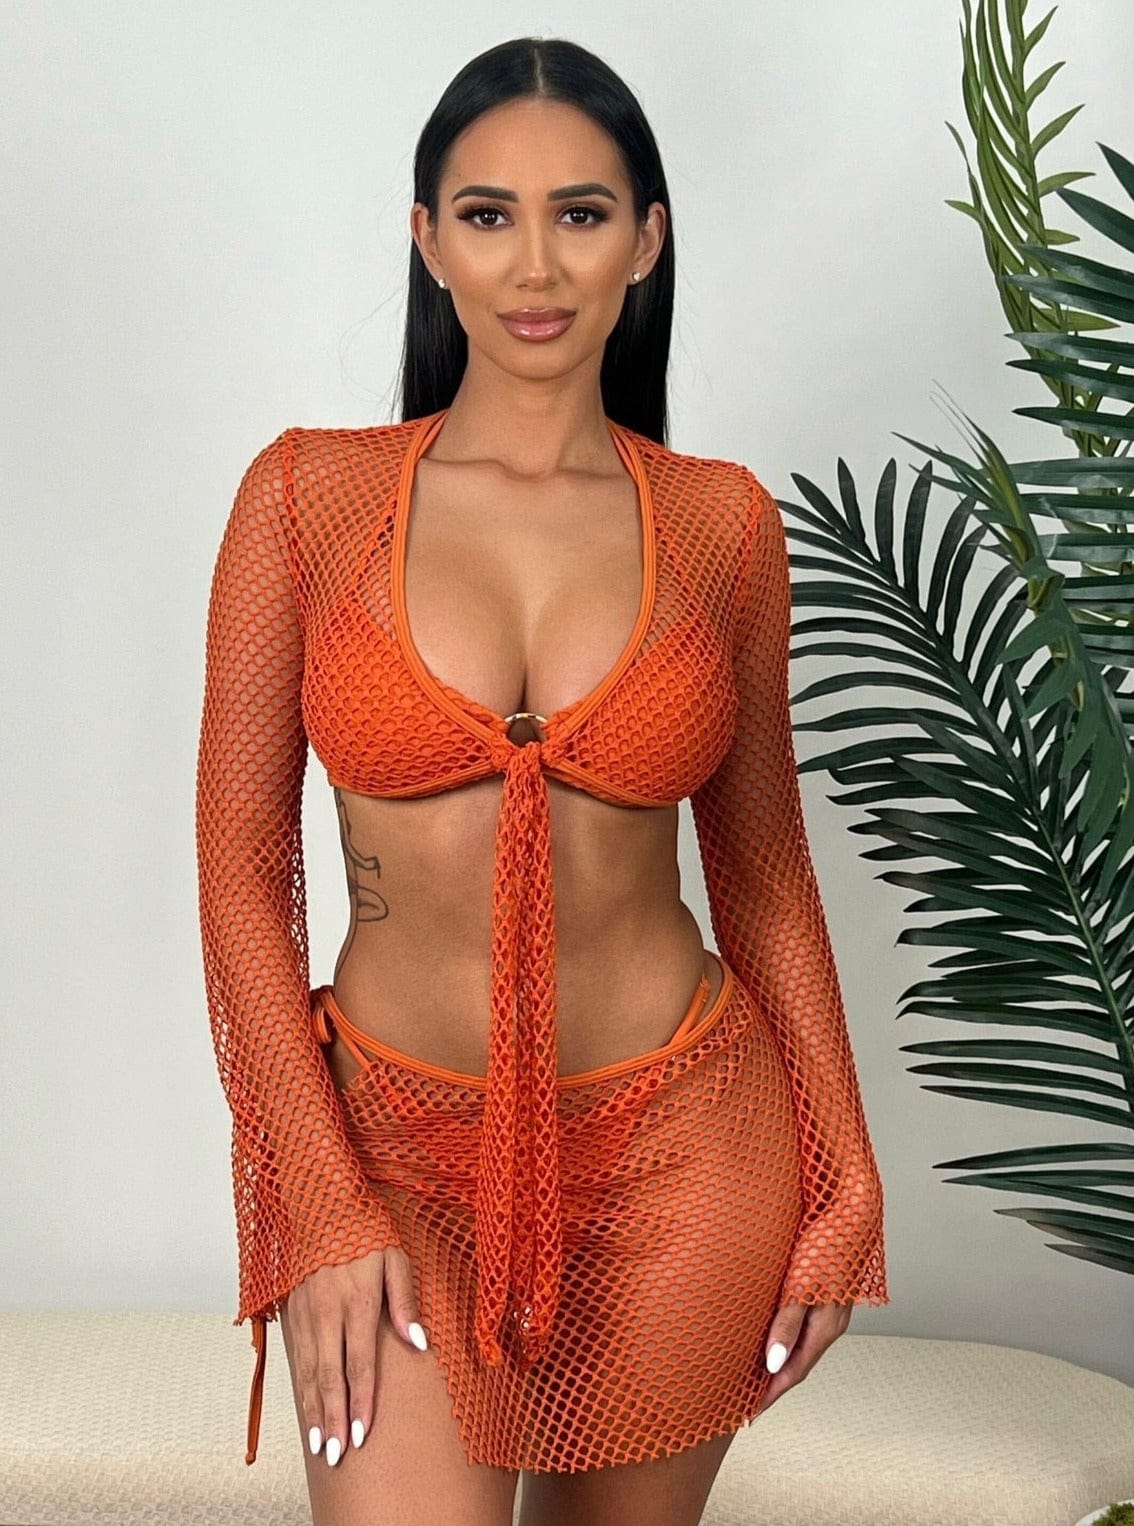 Berry Beachy Swimwear Apparel & Accessories > Clothing > Skirts 2 Pc. Tulum White Mesh Net Tie Front Top & Skirt Beach Cover-Up Set 2023 White Nude Berry Beachy Swimwear Tulum Net Skirt Top Set